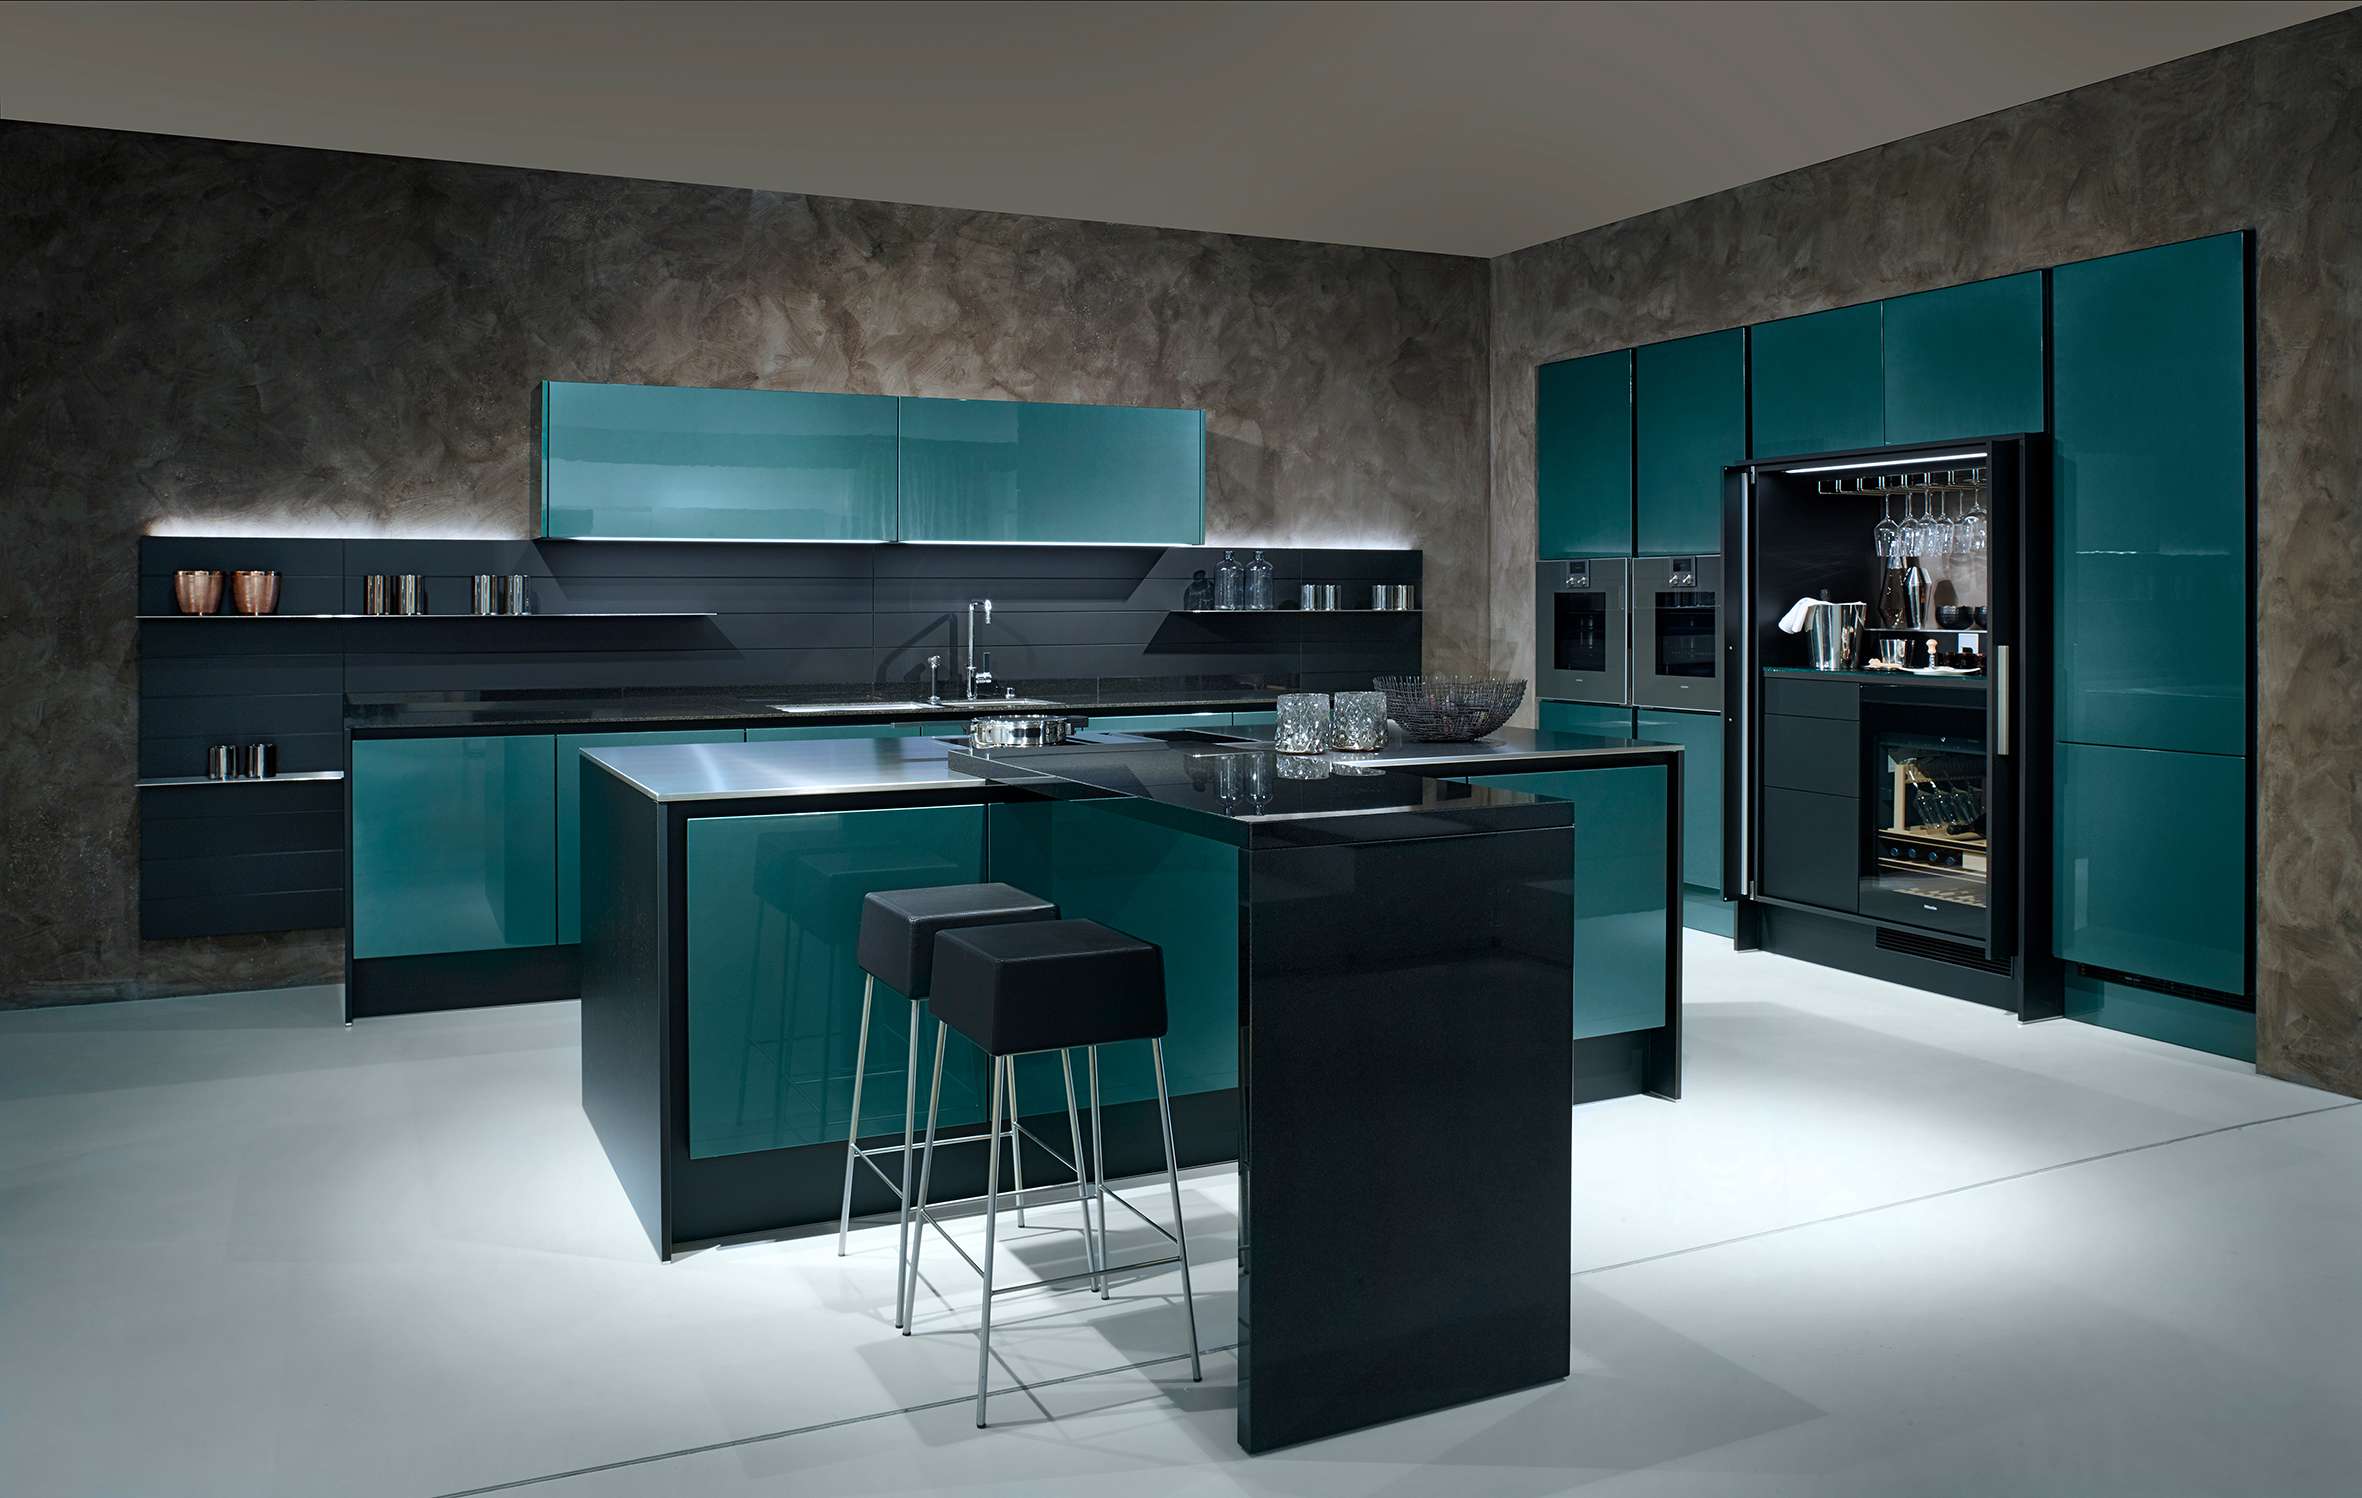 Poggenpohl kitchen designs are well-balanced and are based on reduction and simplicity.